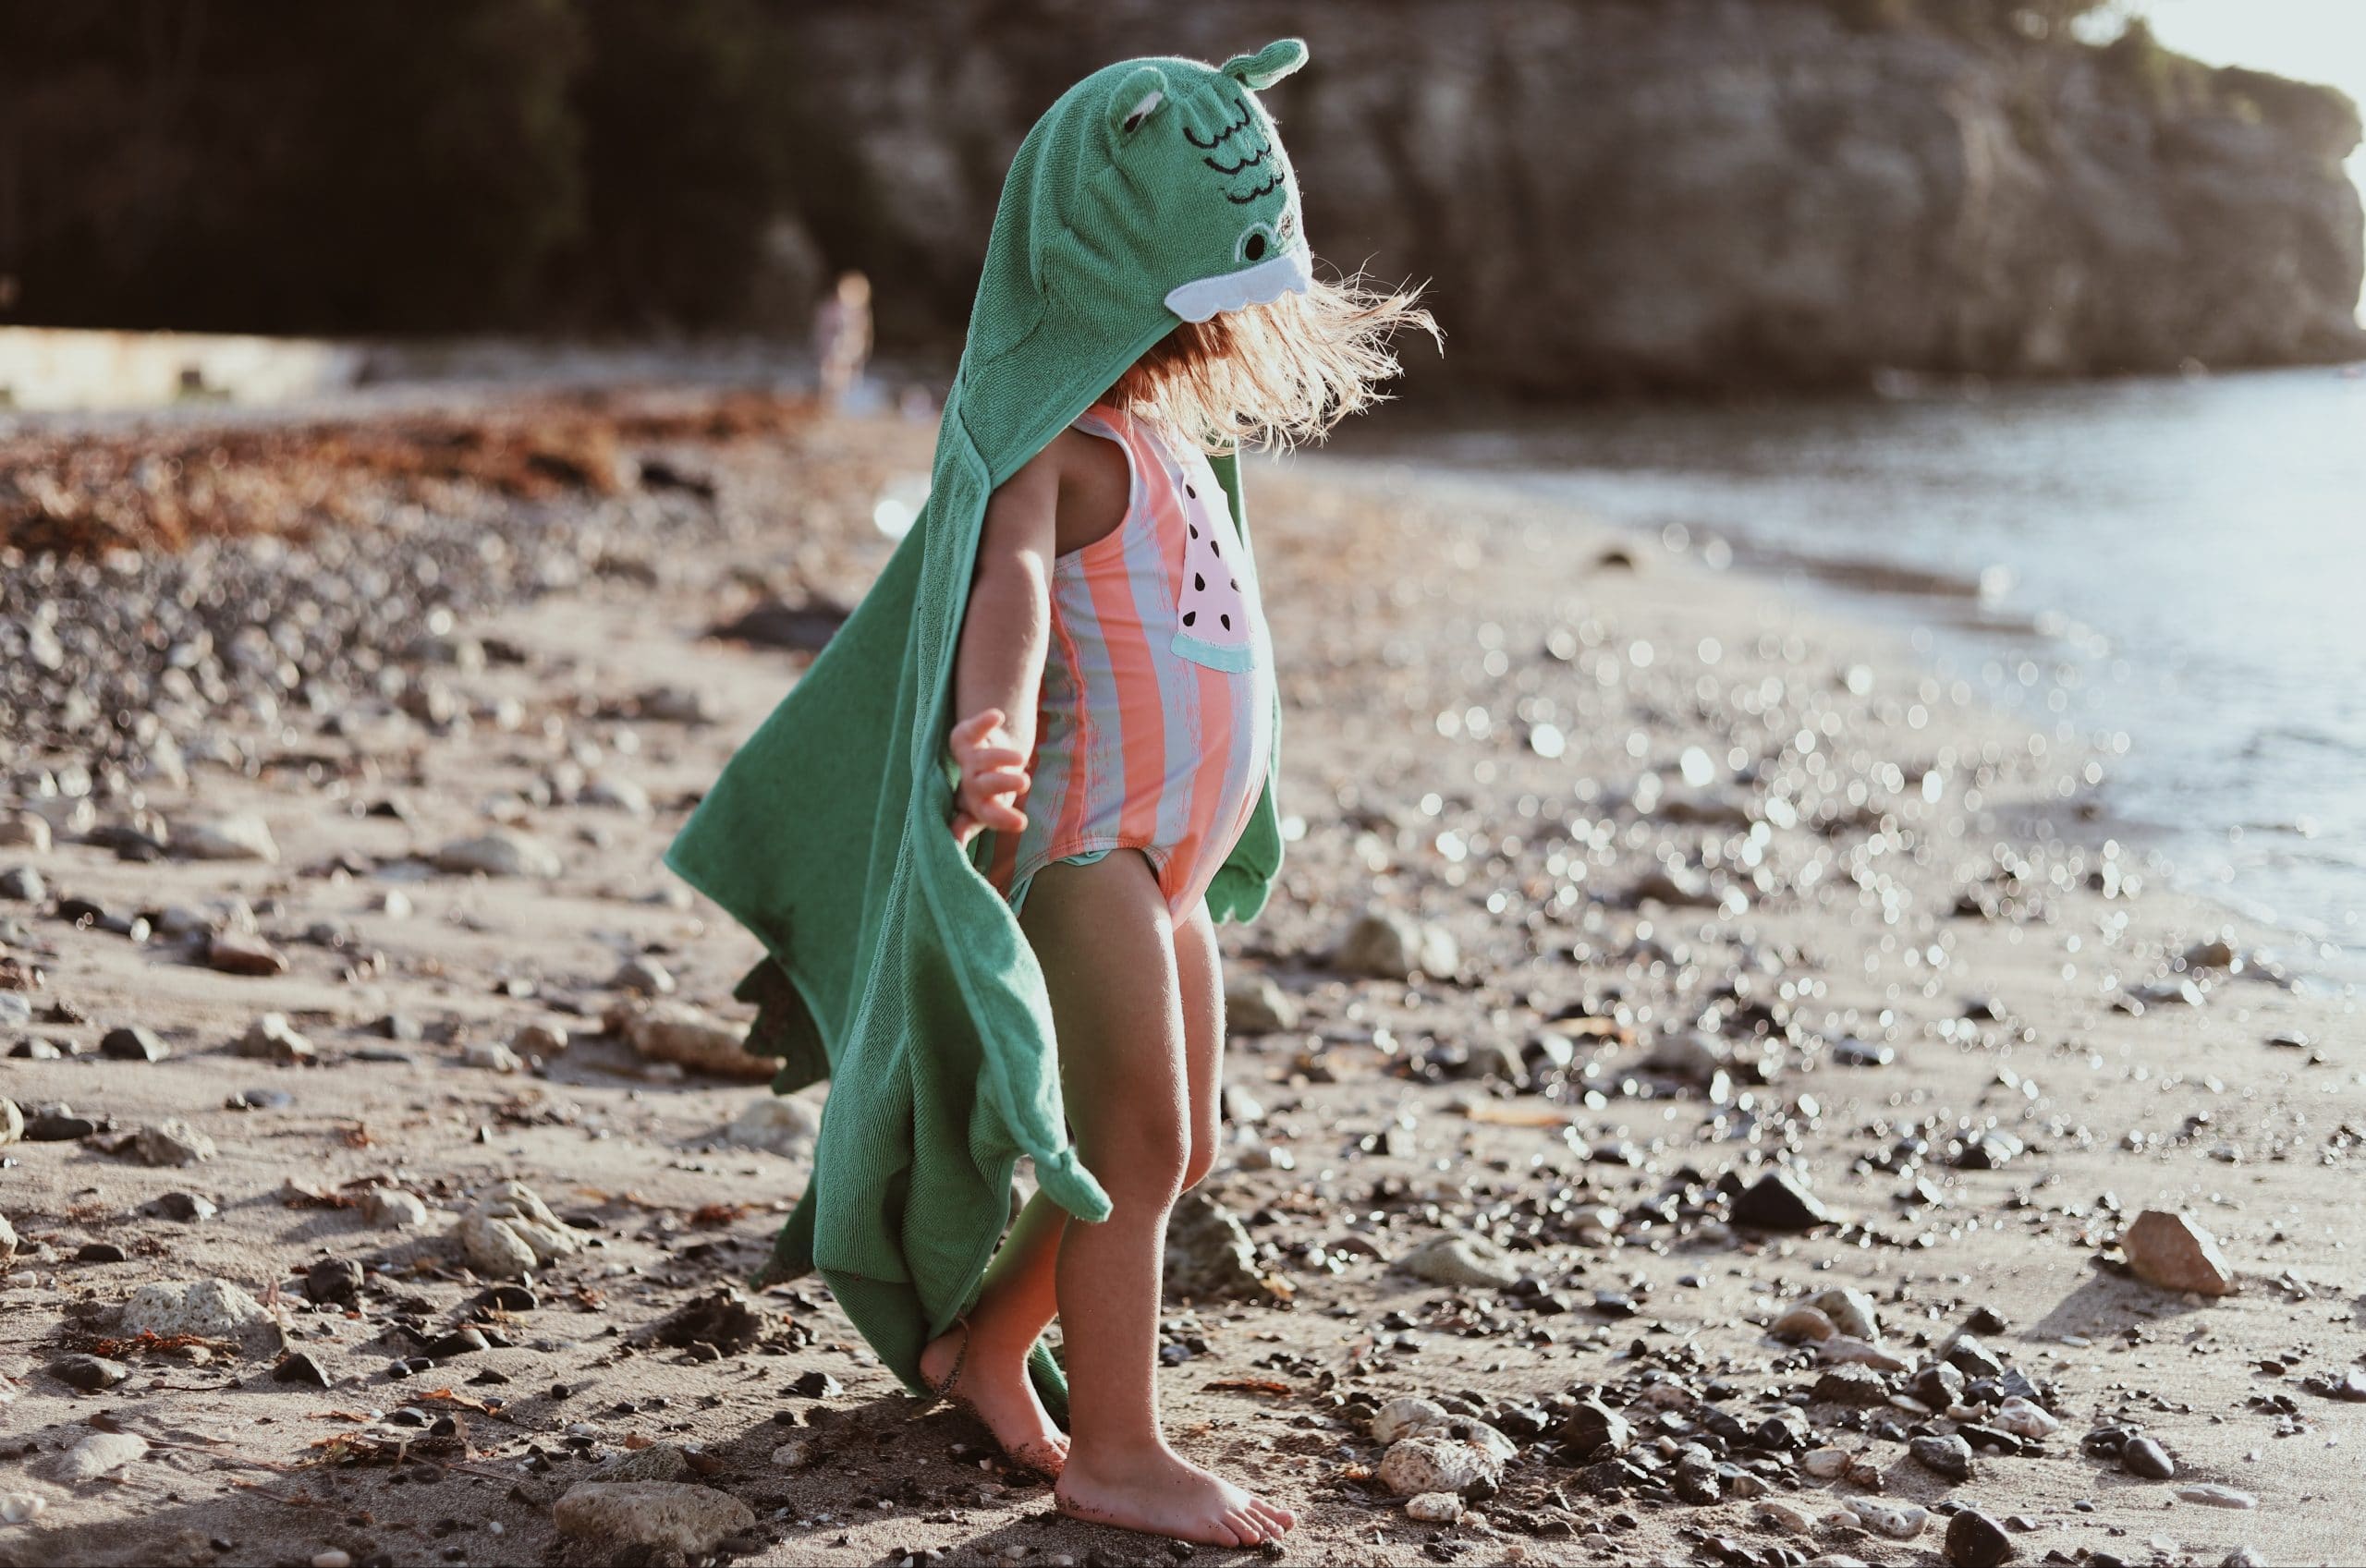 Child wearing a poncho towel